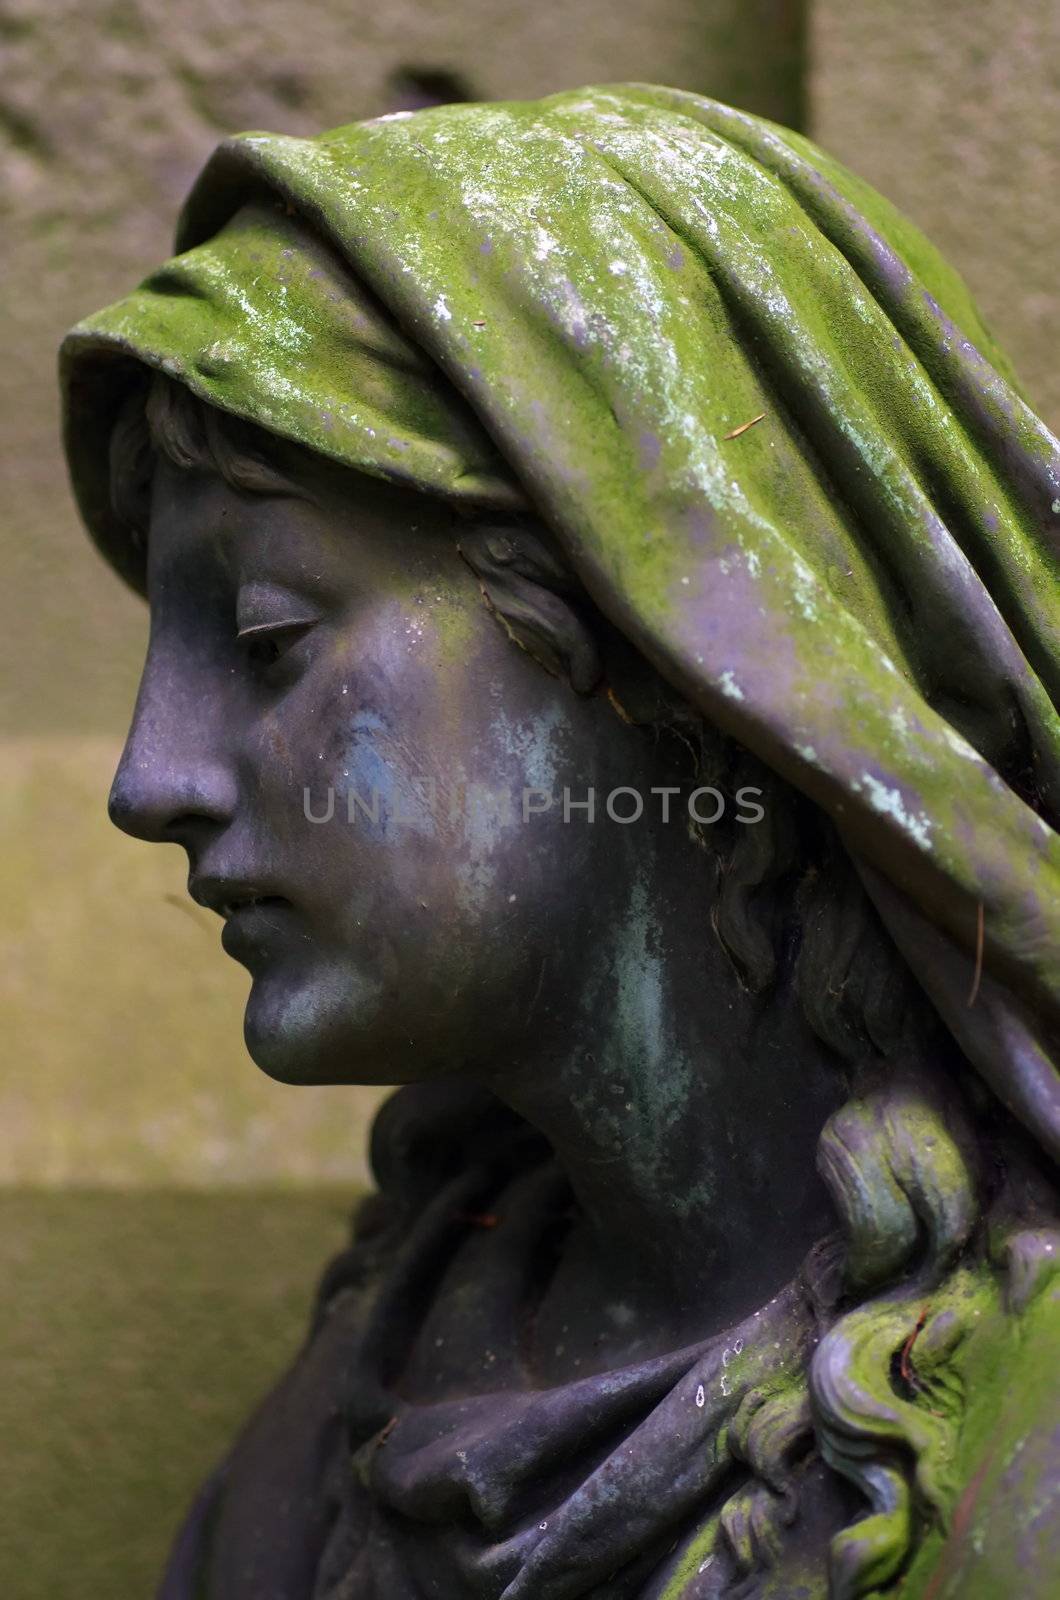 Vintage cementery sculpture face by FotoFrank